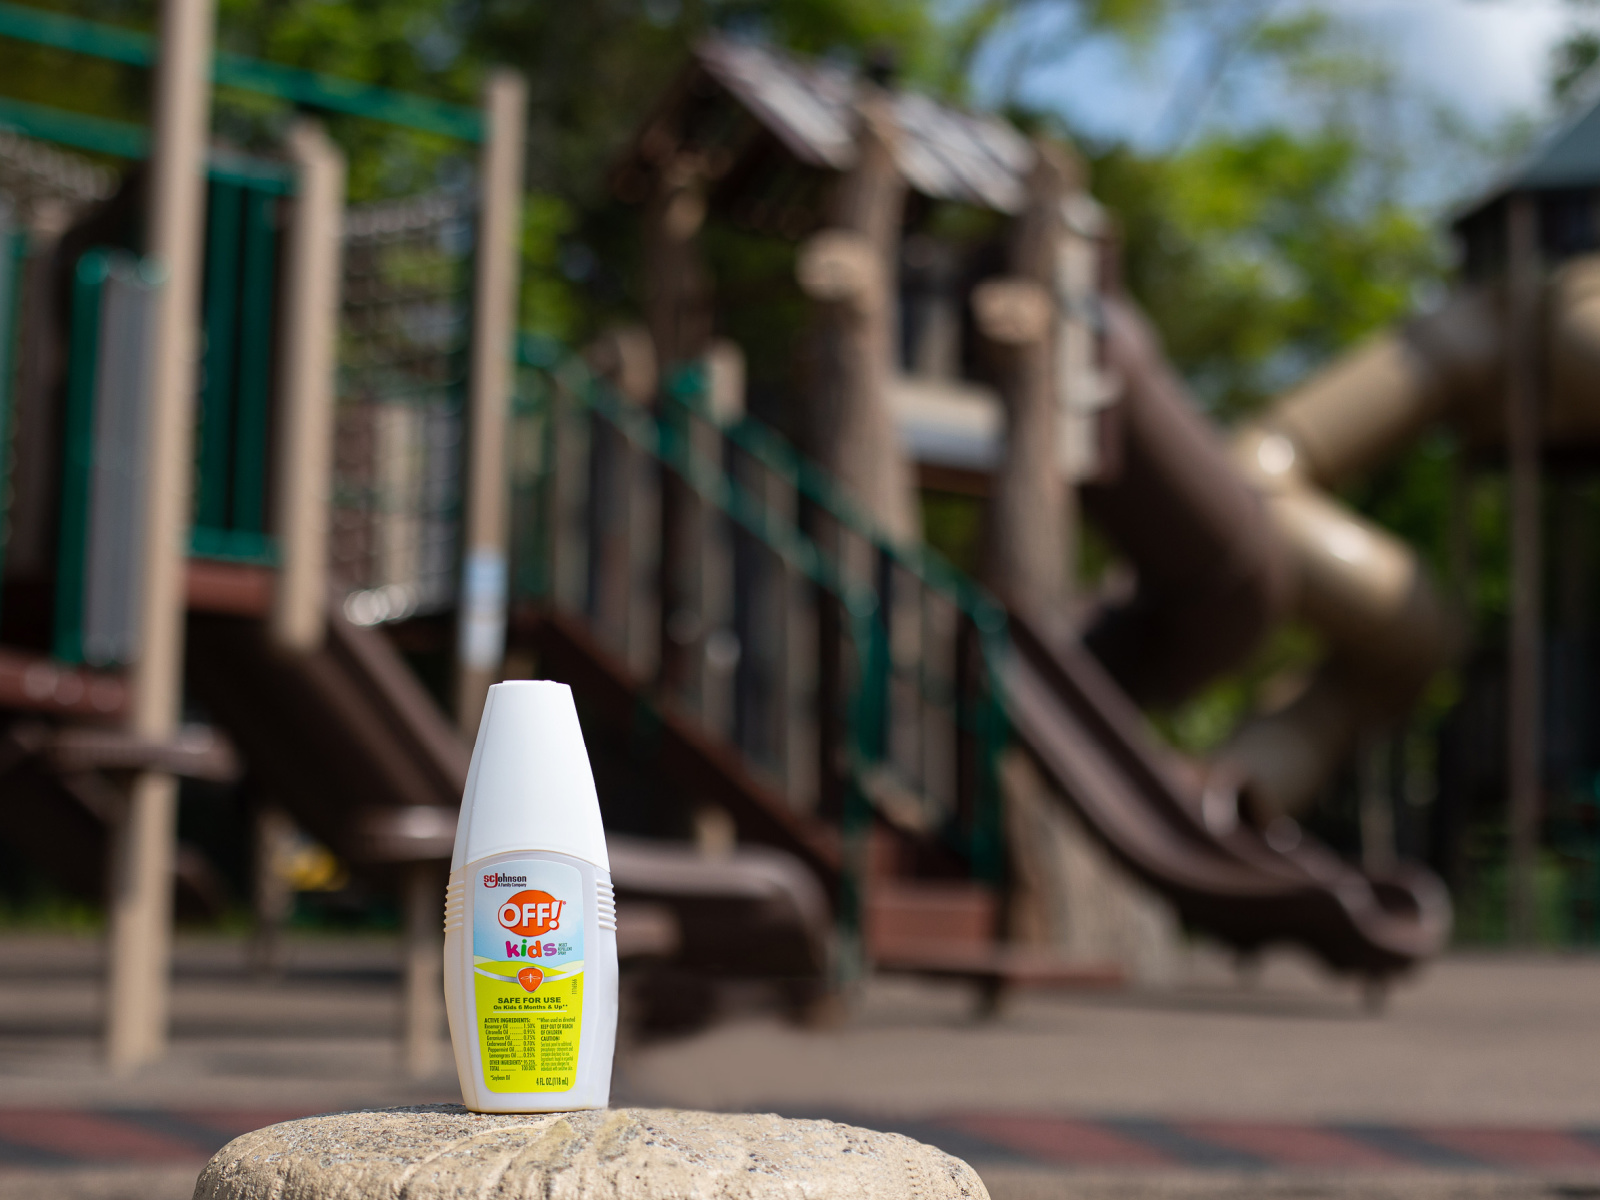 Prevent Bug Bites Everyday! Stock Up On OFF!® Kids Mosquito Spray At Publix on I Heart Publix